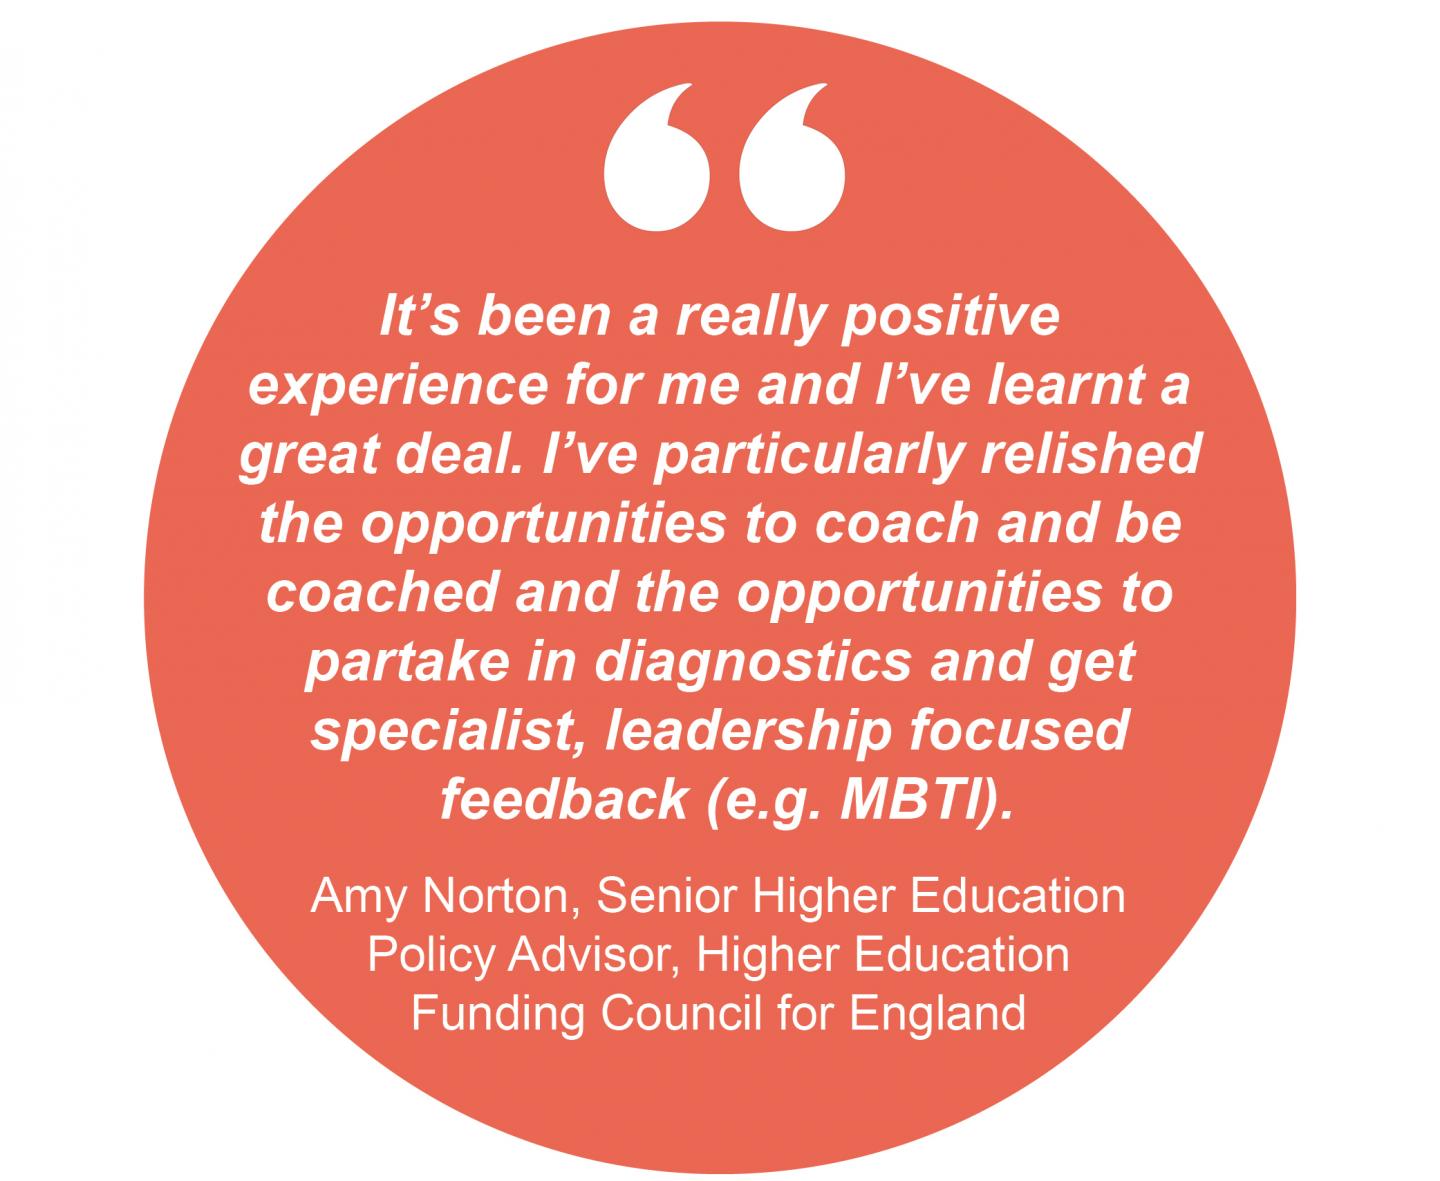 "It's been a really positive experience for me and I've learnt a great deal. I've particularly relished the opportunities to coach and be coached and the opportunities to partake in diagnostics and get specialist, leadership focussed feedback (e.g. MBTI)." Amy Norton, Senior Higher Education Policy Advisor, Higher Education Funding Council for England 